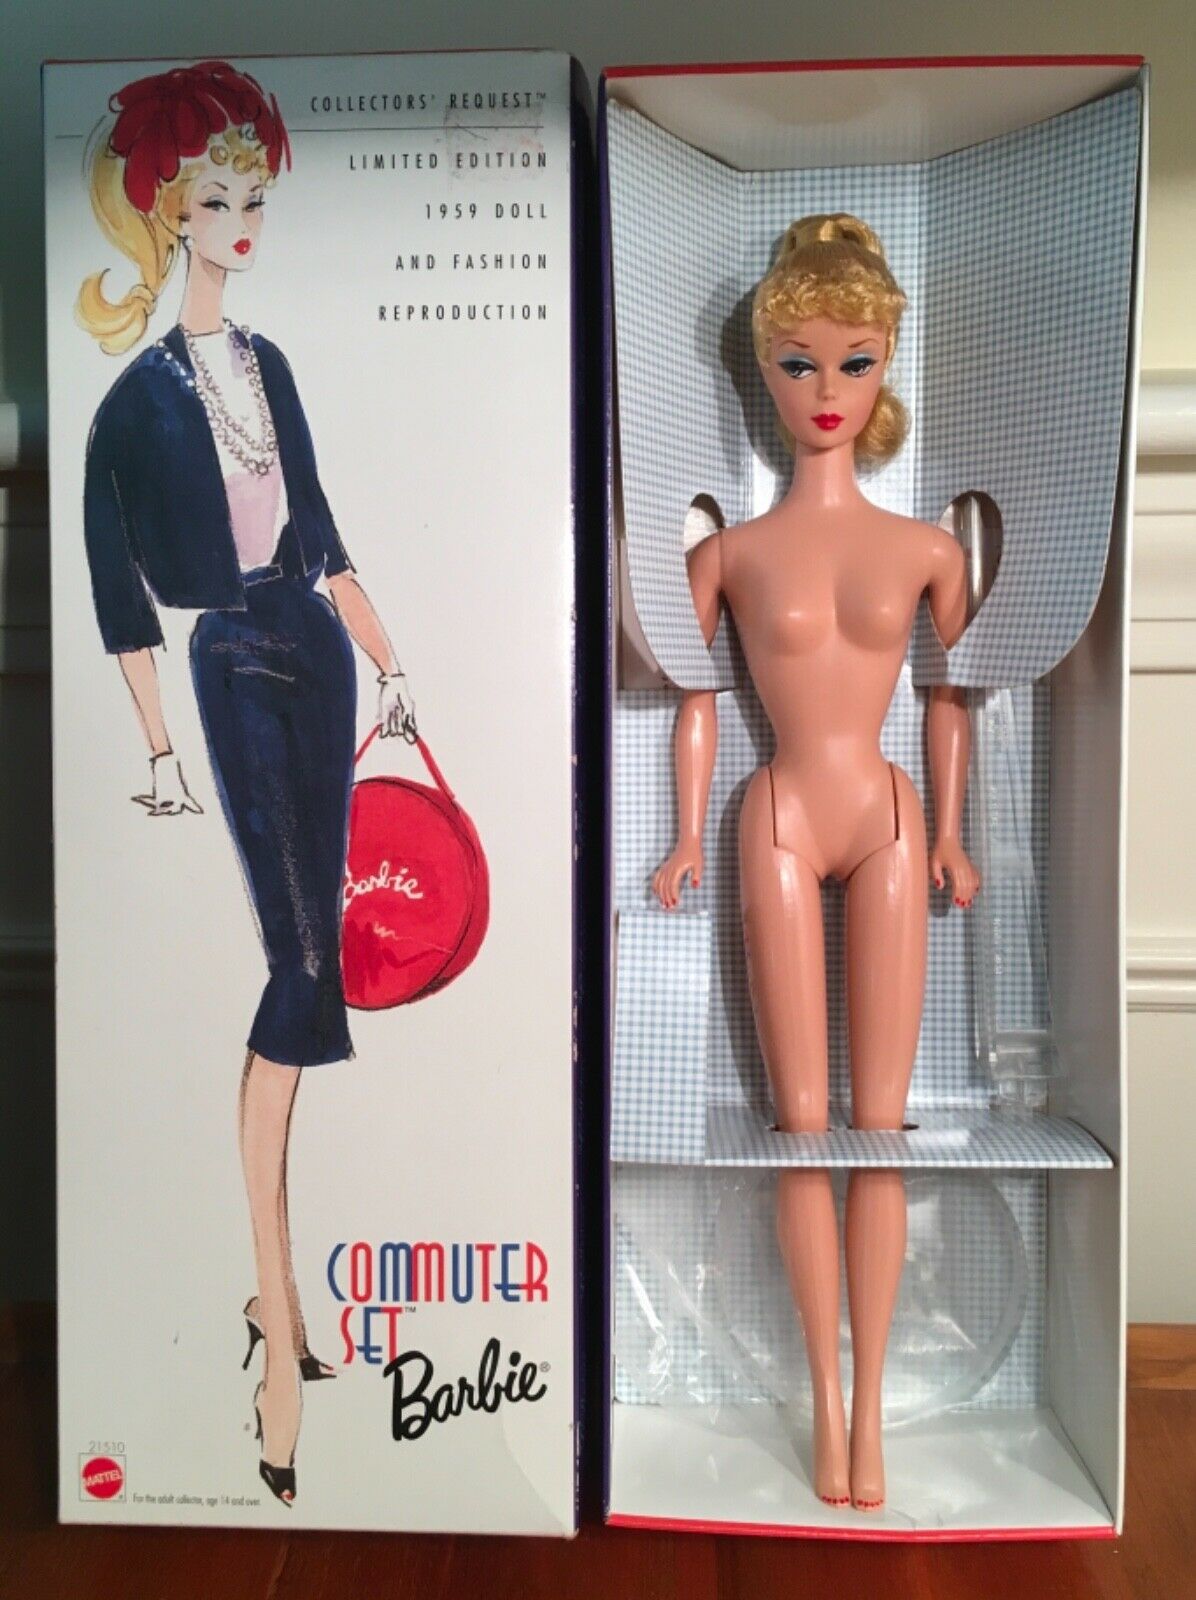 Nude Reproduction Blond Ponytail Barbie Doll & Commuter Set Box